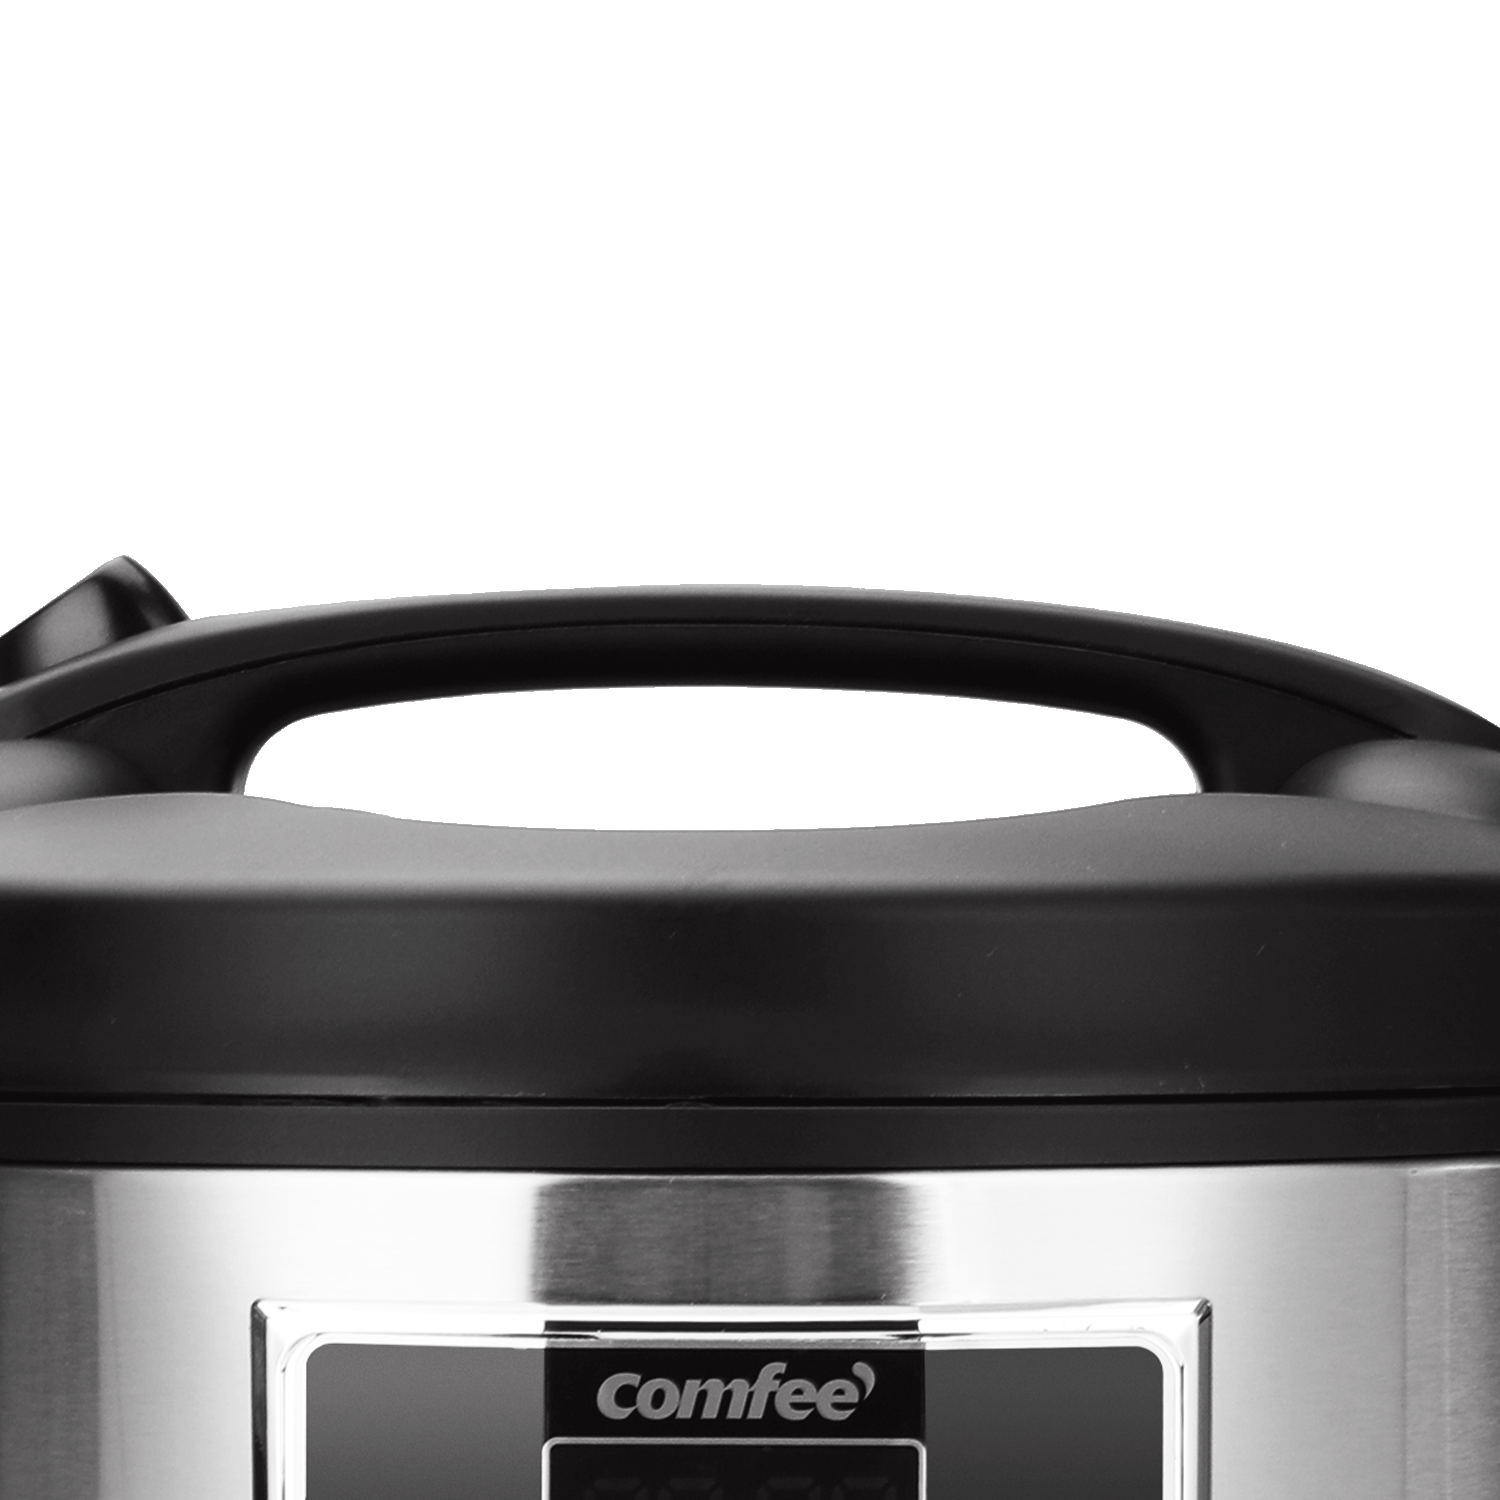 Comfee CRS5010BS COMFEE Rice Cooker, 8-in-1 Stainless Steel Multi